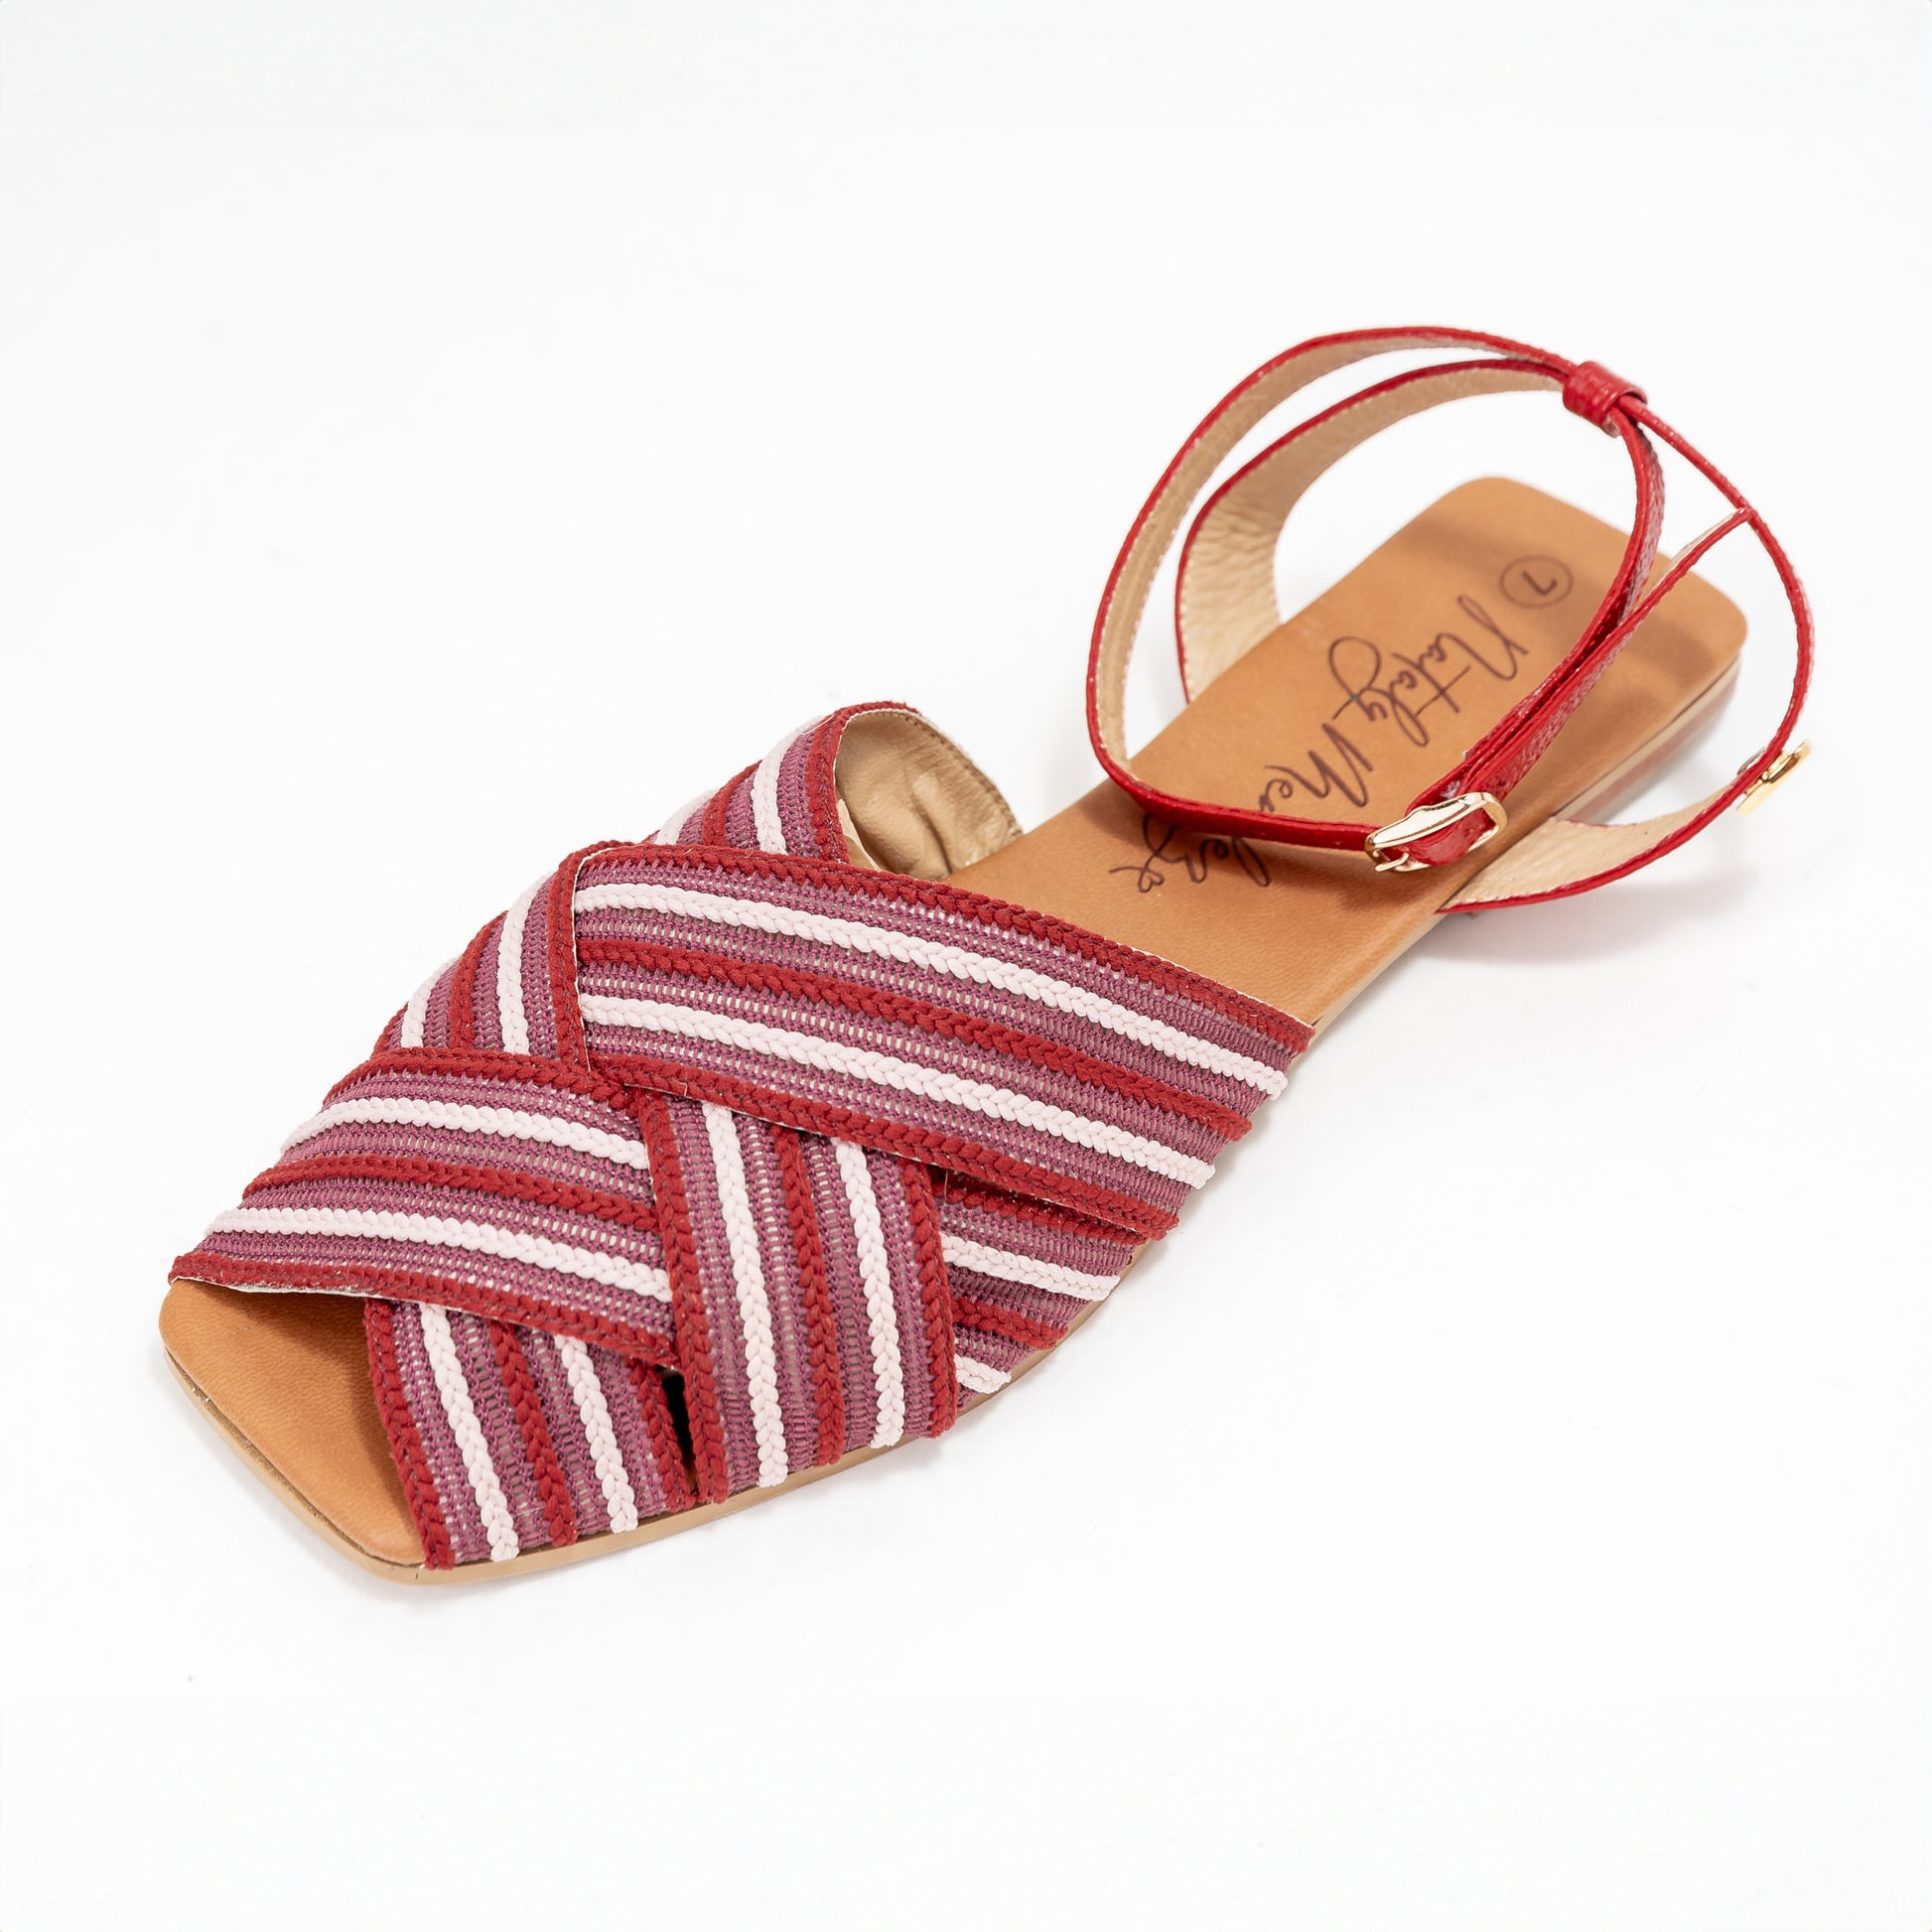 Veronica Flats Sandals - Red Wine by Nataly Mendez, Upper part with handcrafted woven fabric covered on the back with leather. Genuine leather lining Flexible rubber sole Heel height .5 cm Handmade